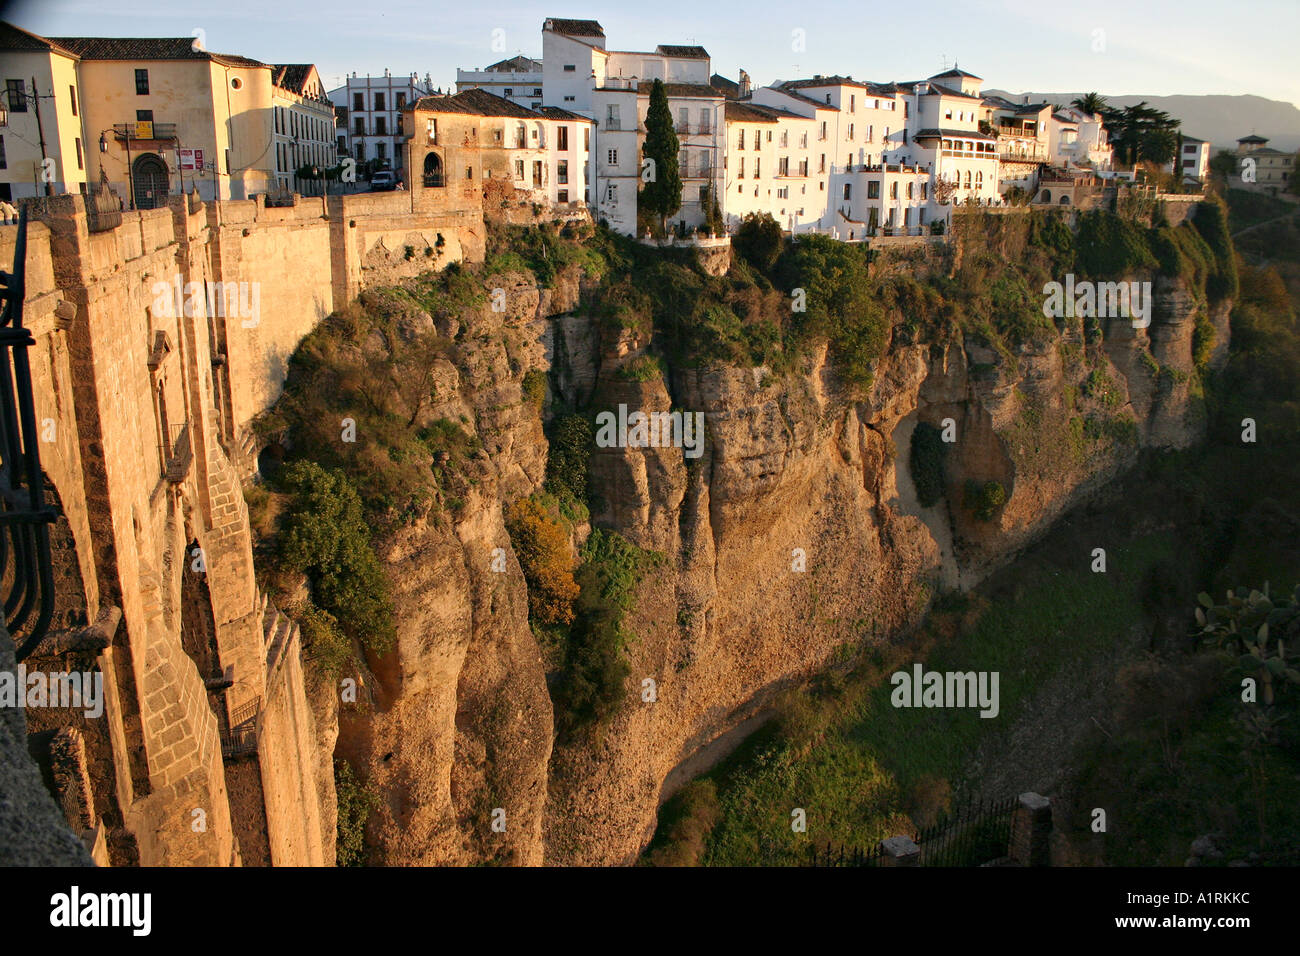 The old town of Ronda perched high above the gorge on warm red cliff lit by a late afternoon sun Ronda Andalucia Spain Stock Photo